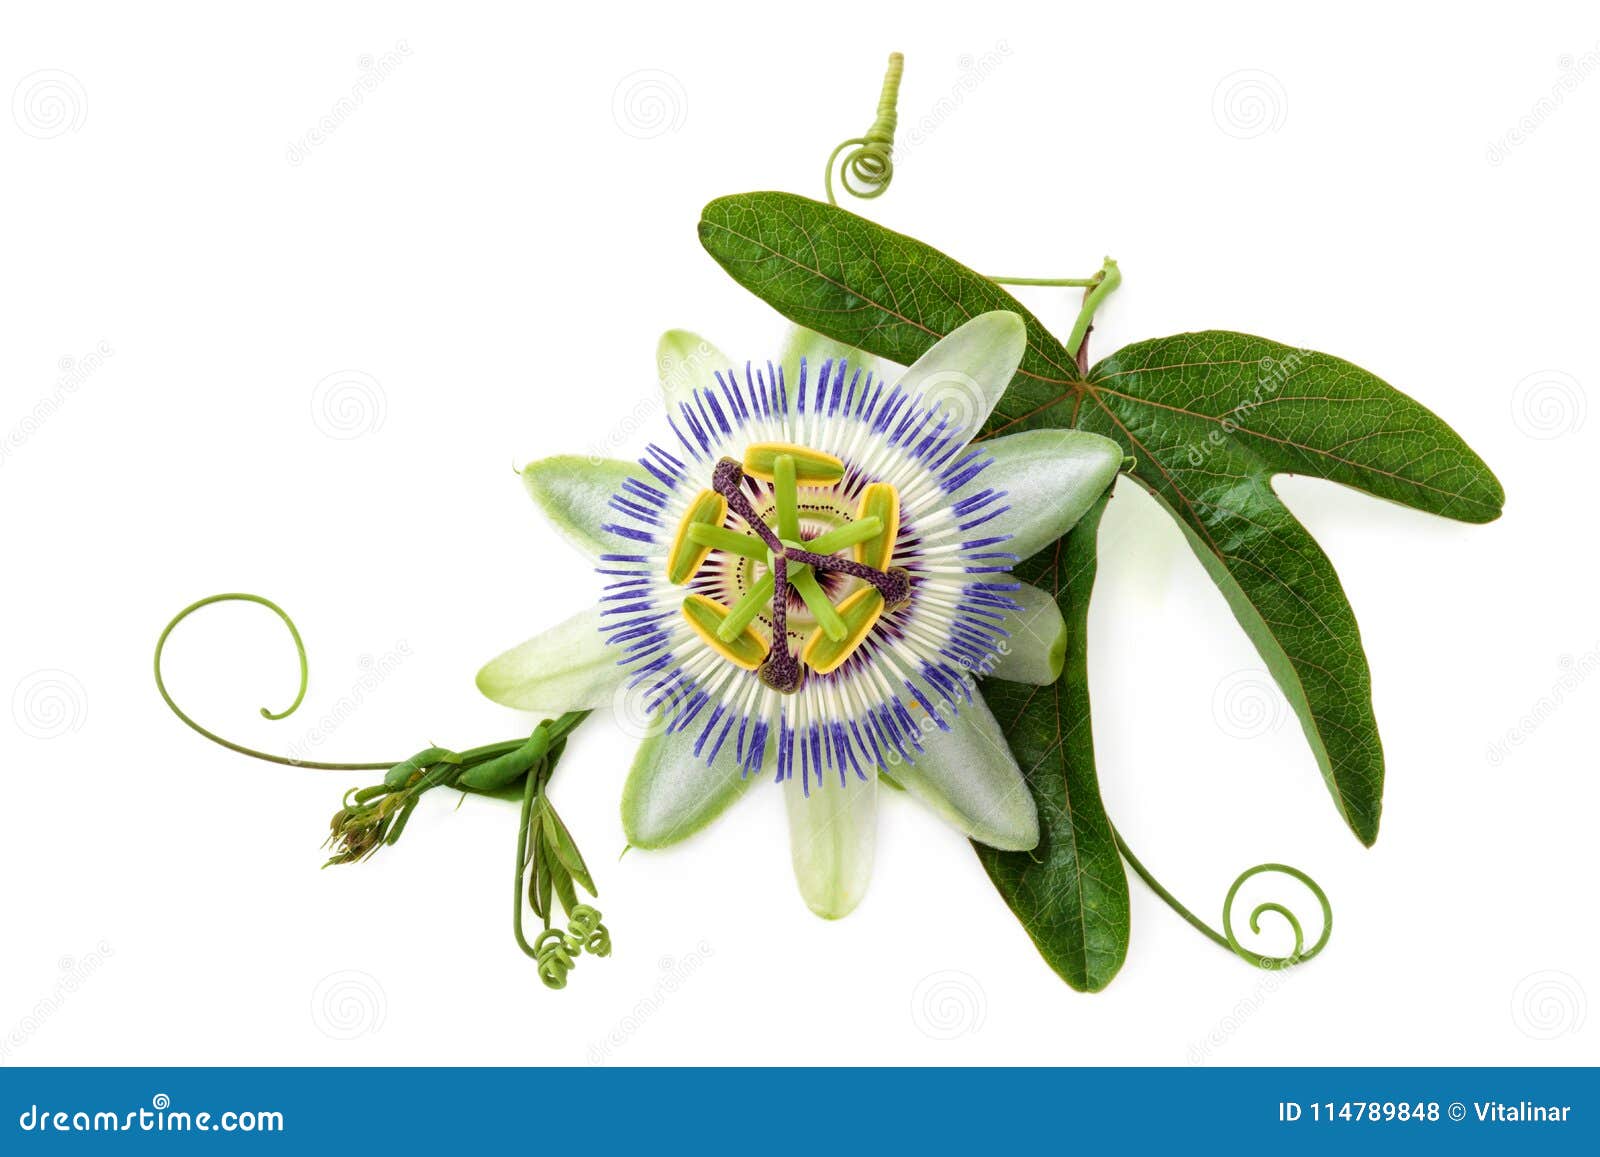 passion flower on white.